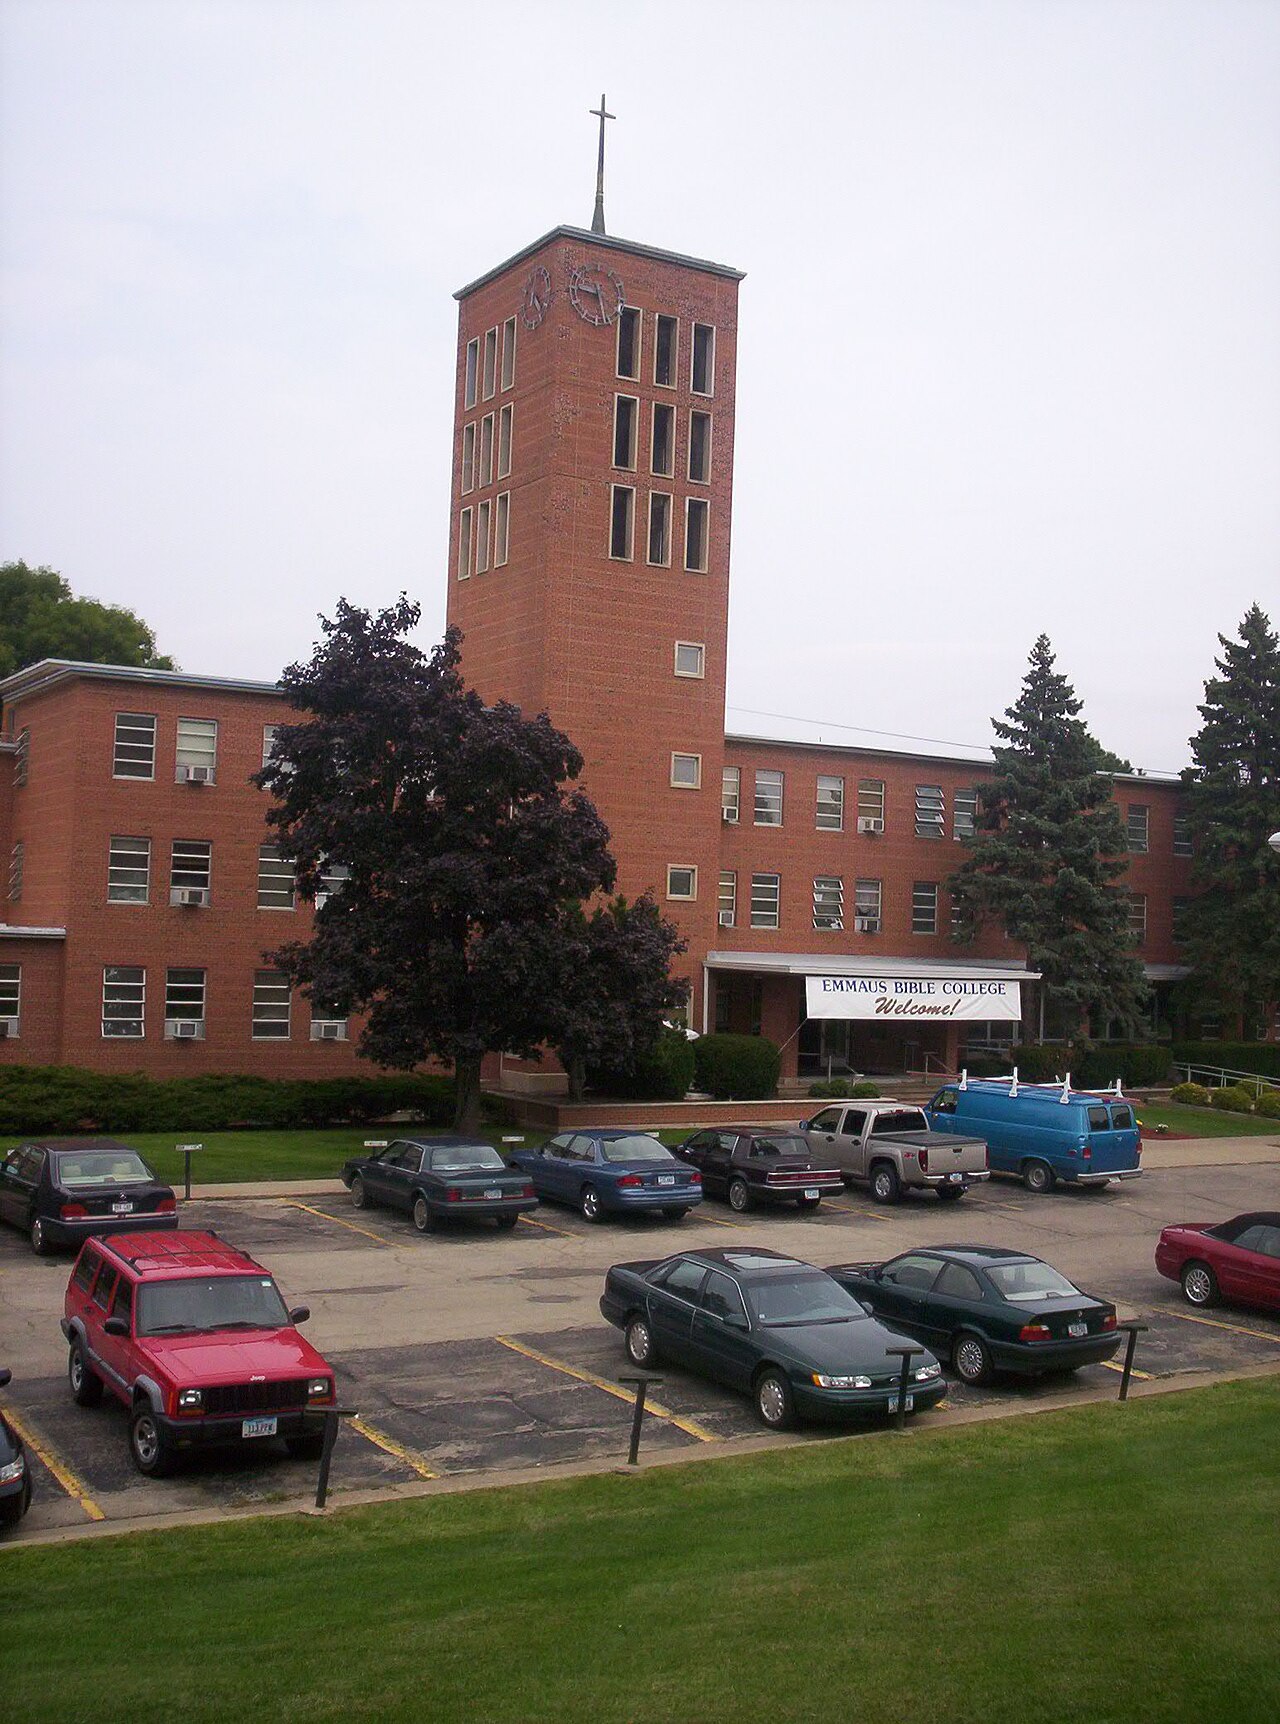 The front of Emmaus Bible College